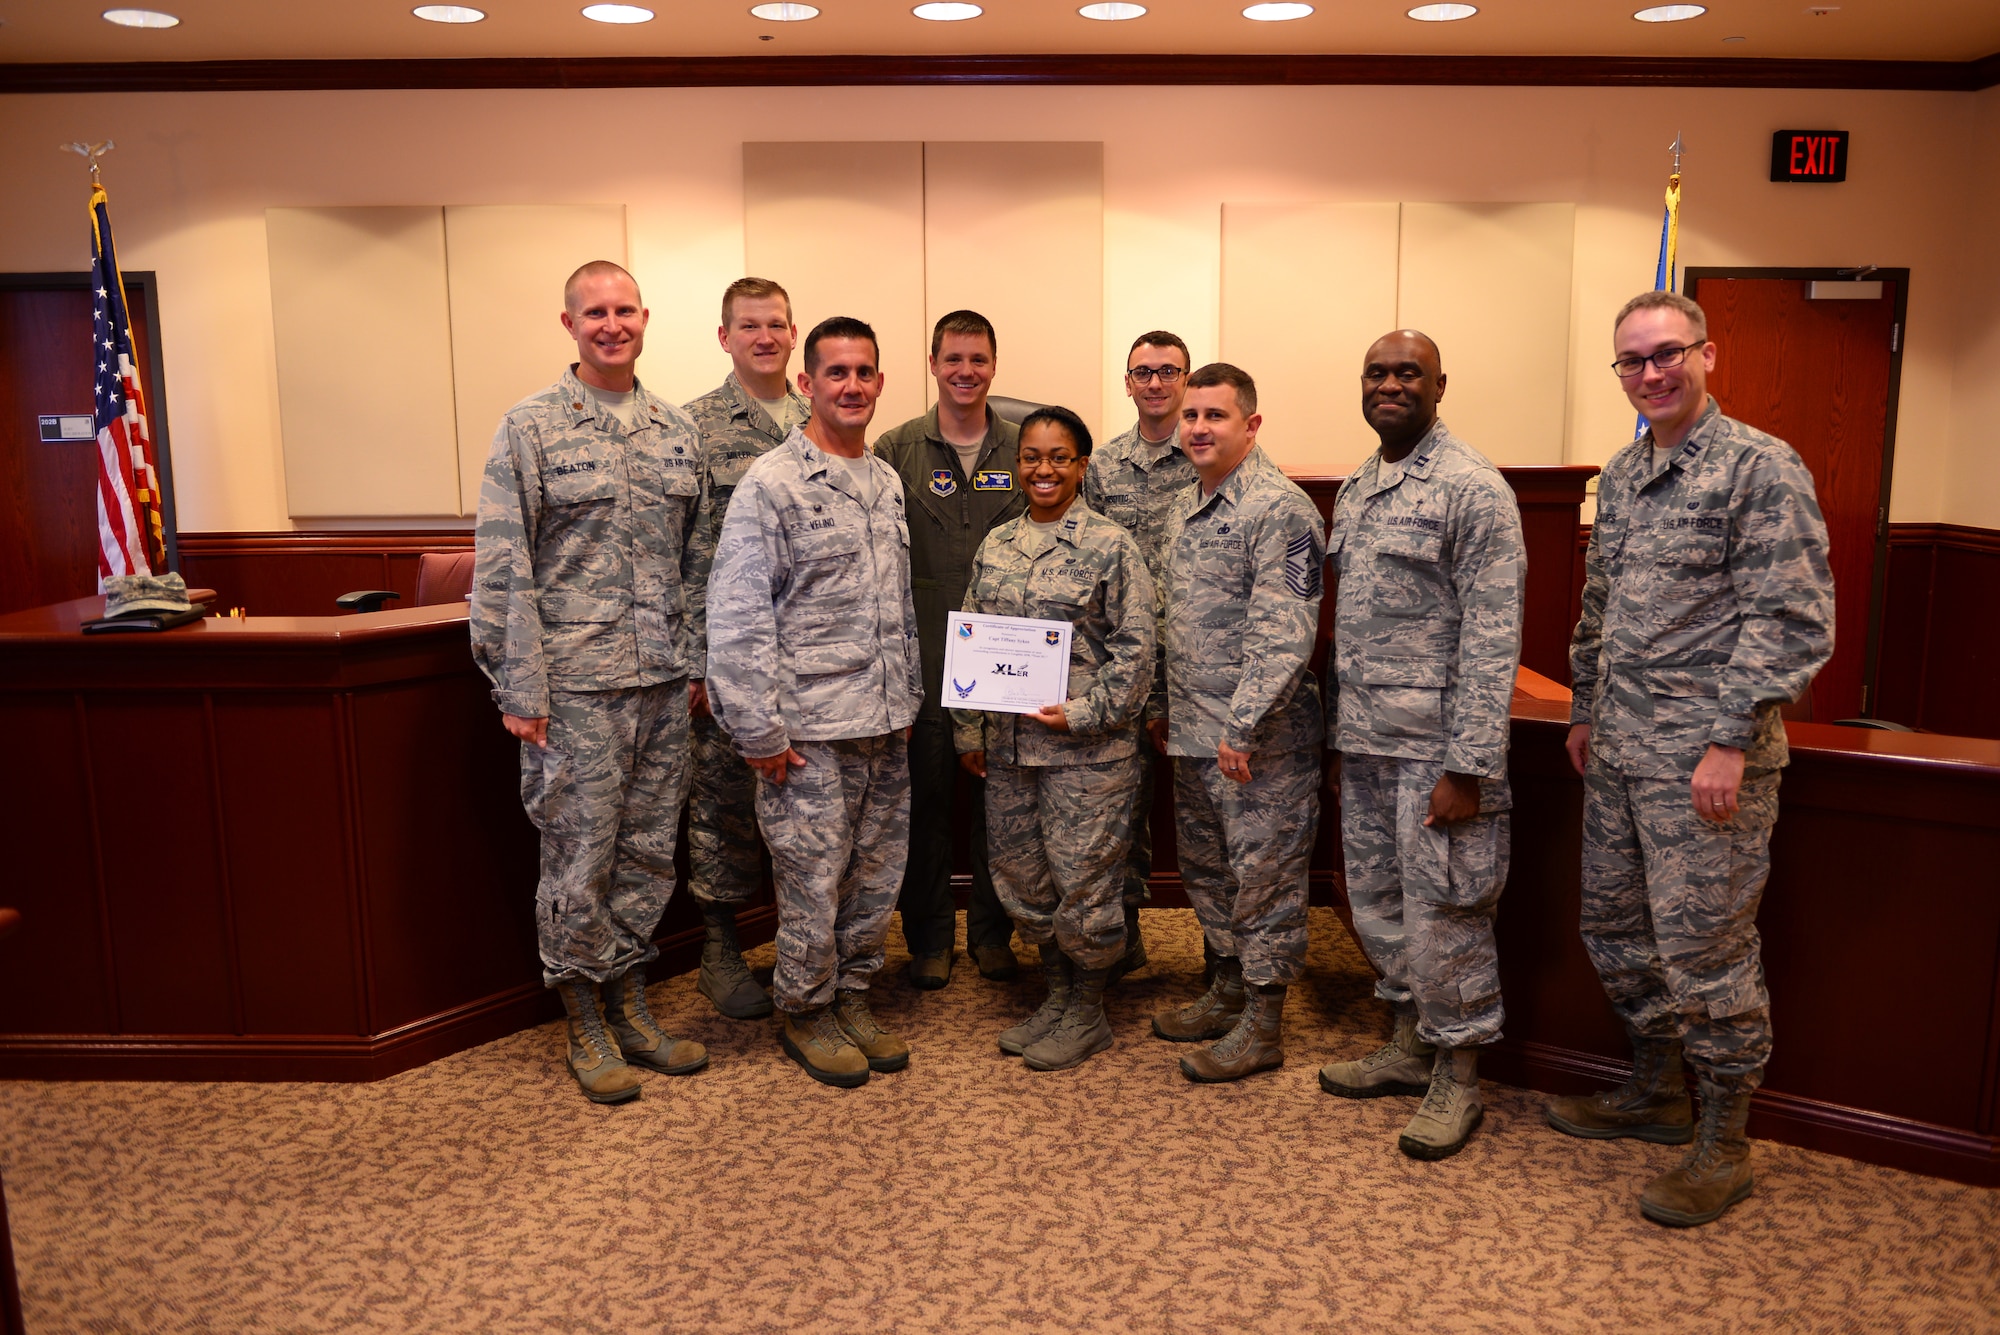 Capt. Tiffany Sykes, 47th Flying Training Wing assistant staff judge advocate, was chosen by wing leadership to be the “XLer” of the week, for the week of Sept. 4, 2018, at Laughlin Air Force Base, Texas. The “XLer” award, presented by Col. Charlie Velino, 47th Flying Training Wing commander, is given to those who consistently make outstanding contributions to their unit and the Laughlin mission. (U.S. Air Force photo by Senior Airman Benjamin N. Valmoja)